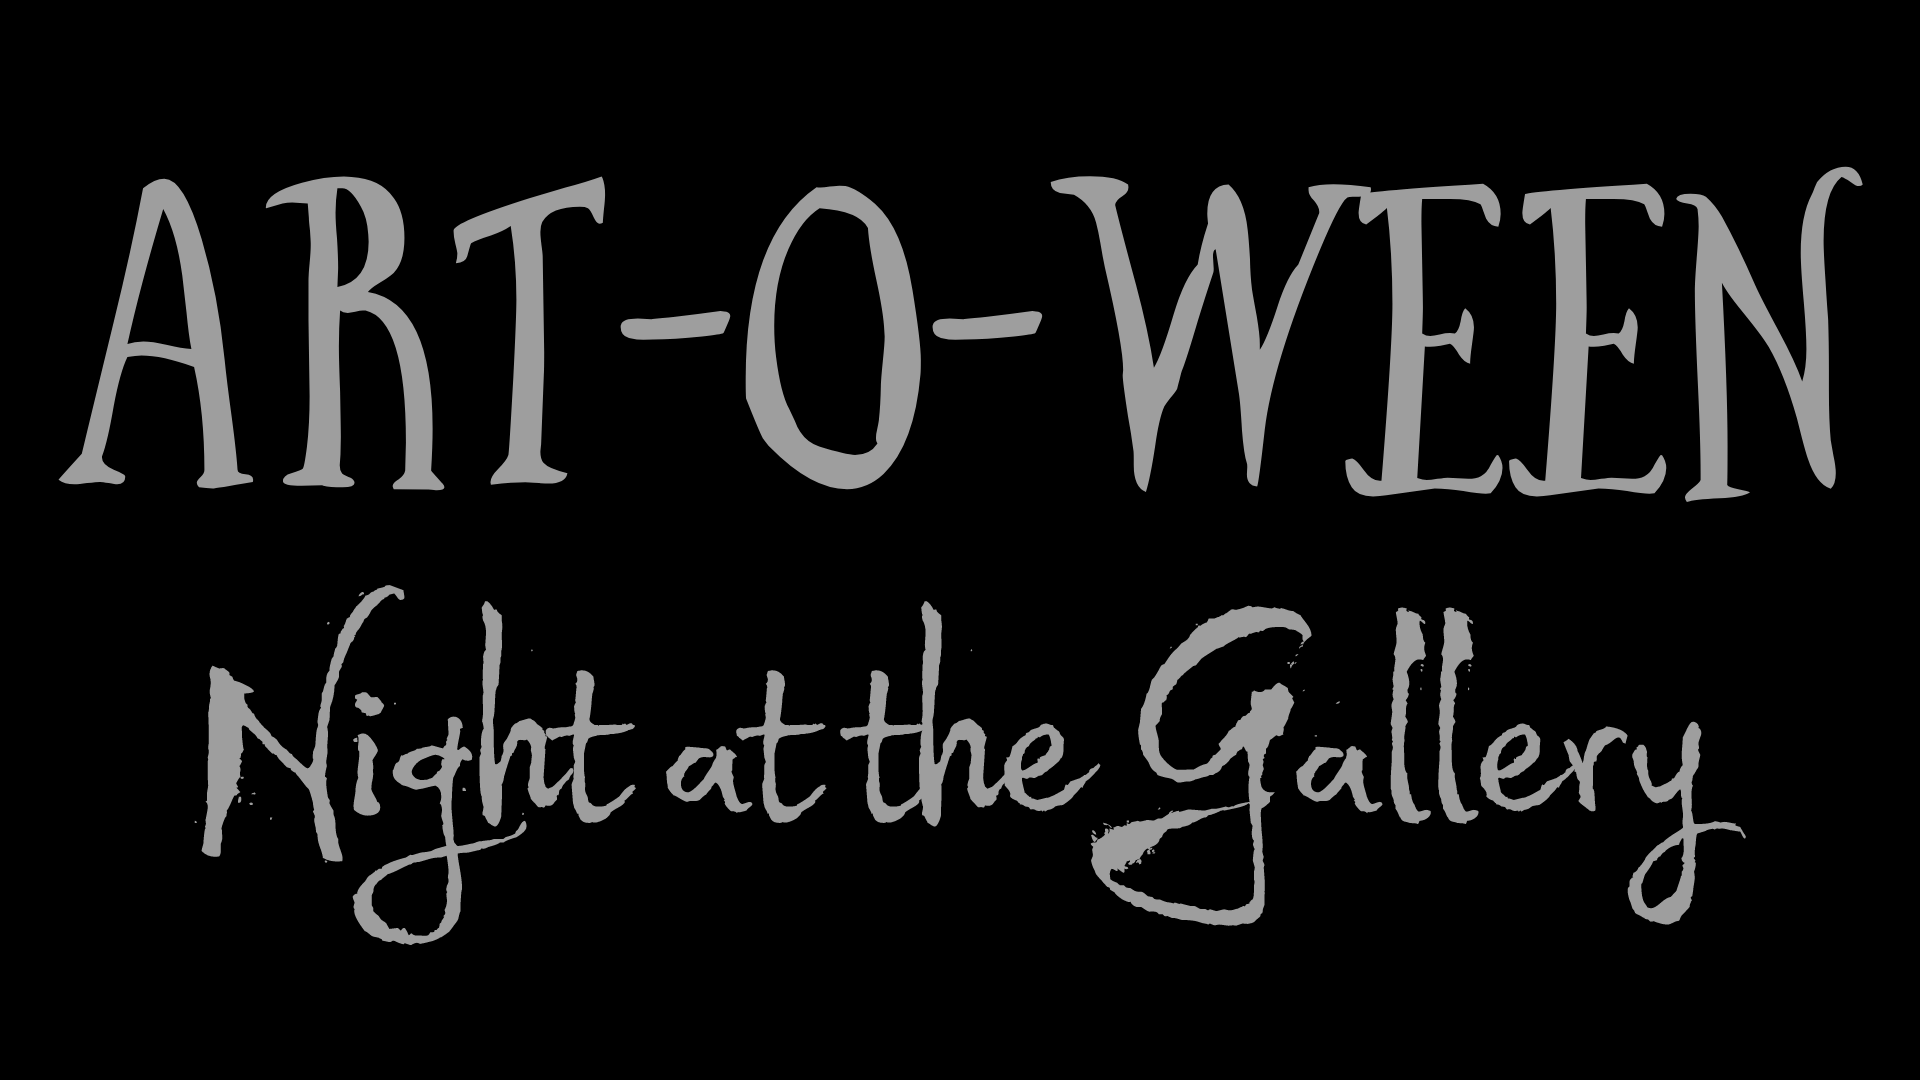 ART-O-Ween: Night at the Gallery